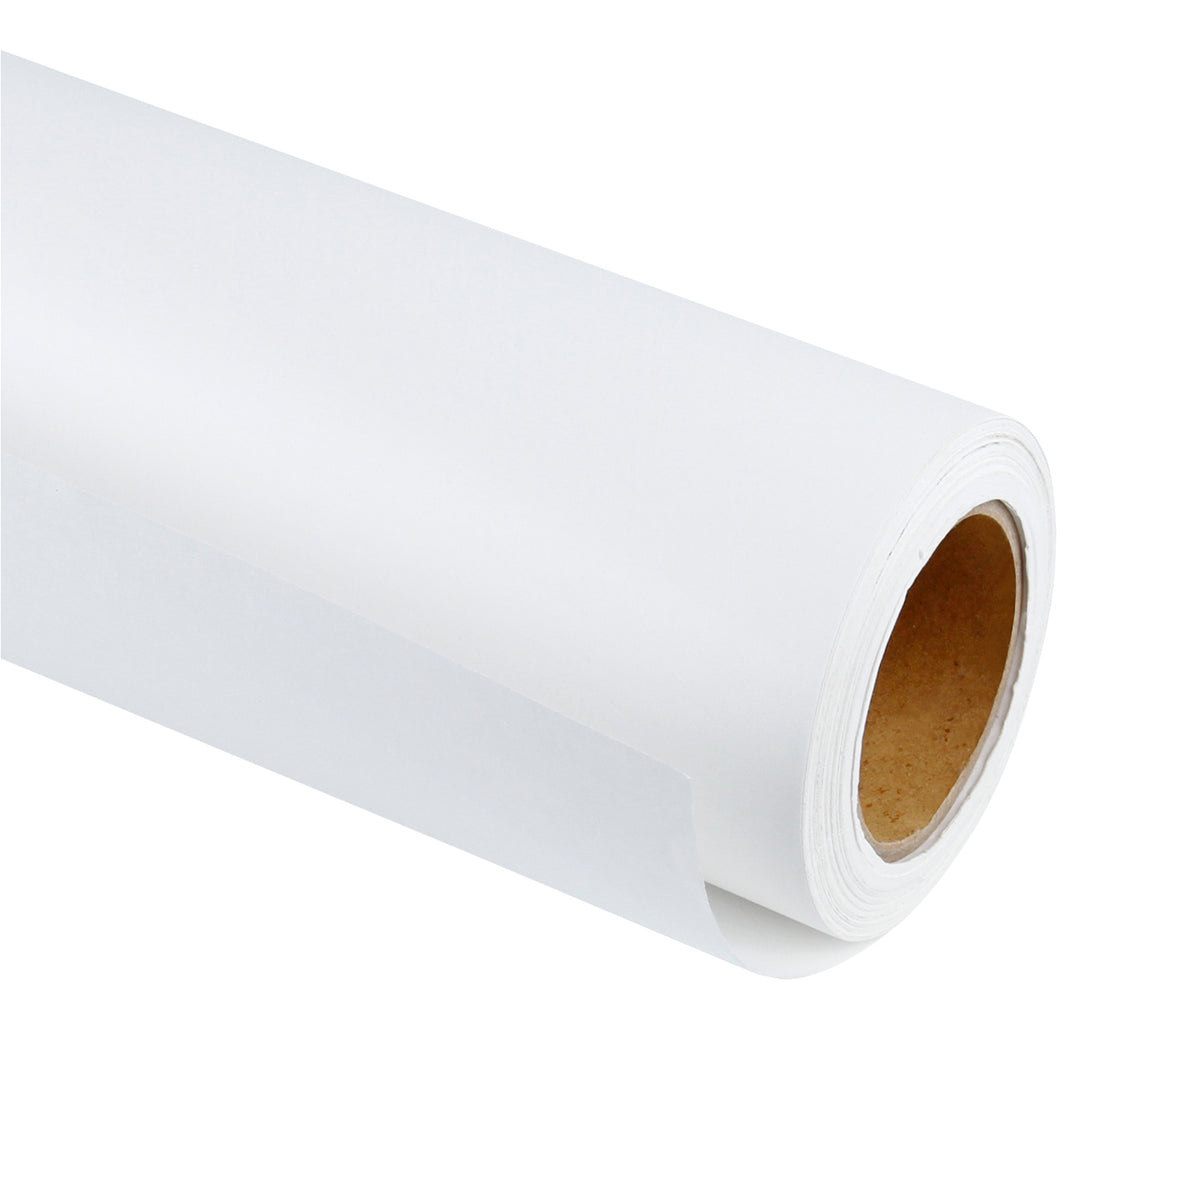 White Kraft Paper Roll - 48 inch x 100 Feet - Recycled Paper Perfect f